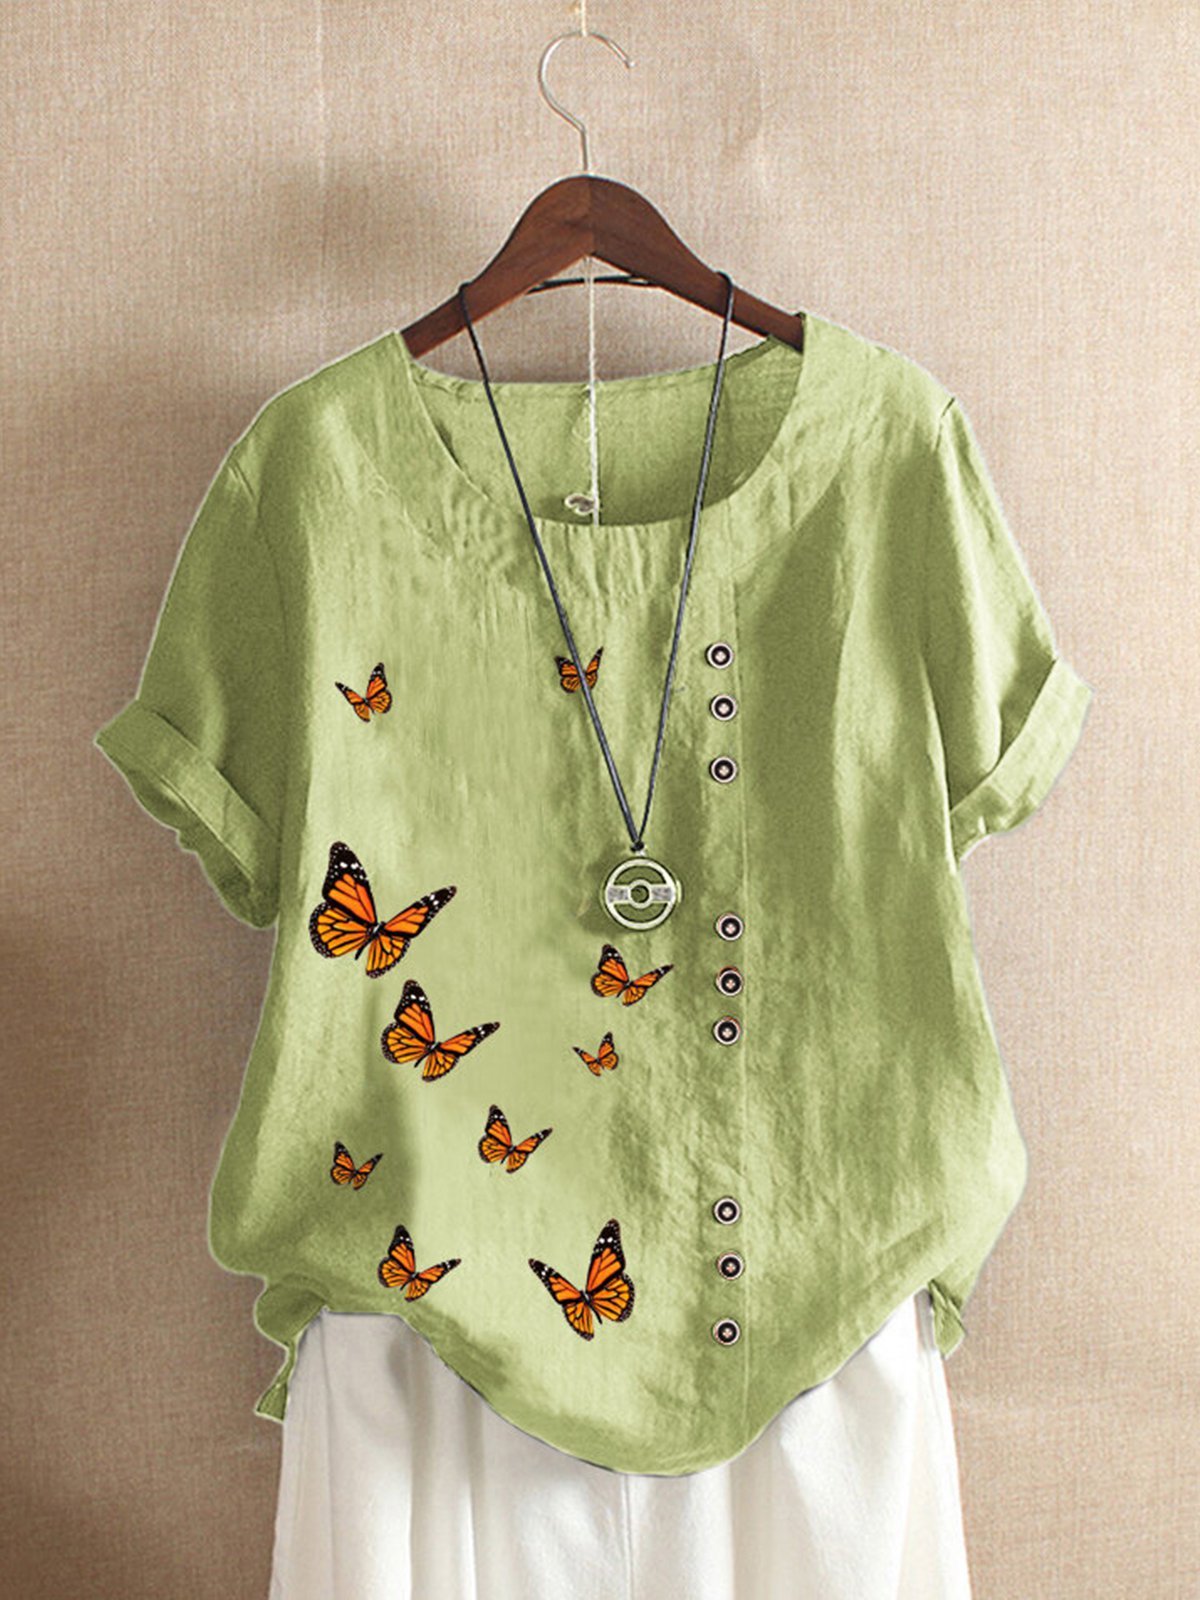 Aovica-Vintage Casual Plus Size Butterflies Print Shirts Tops